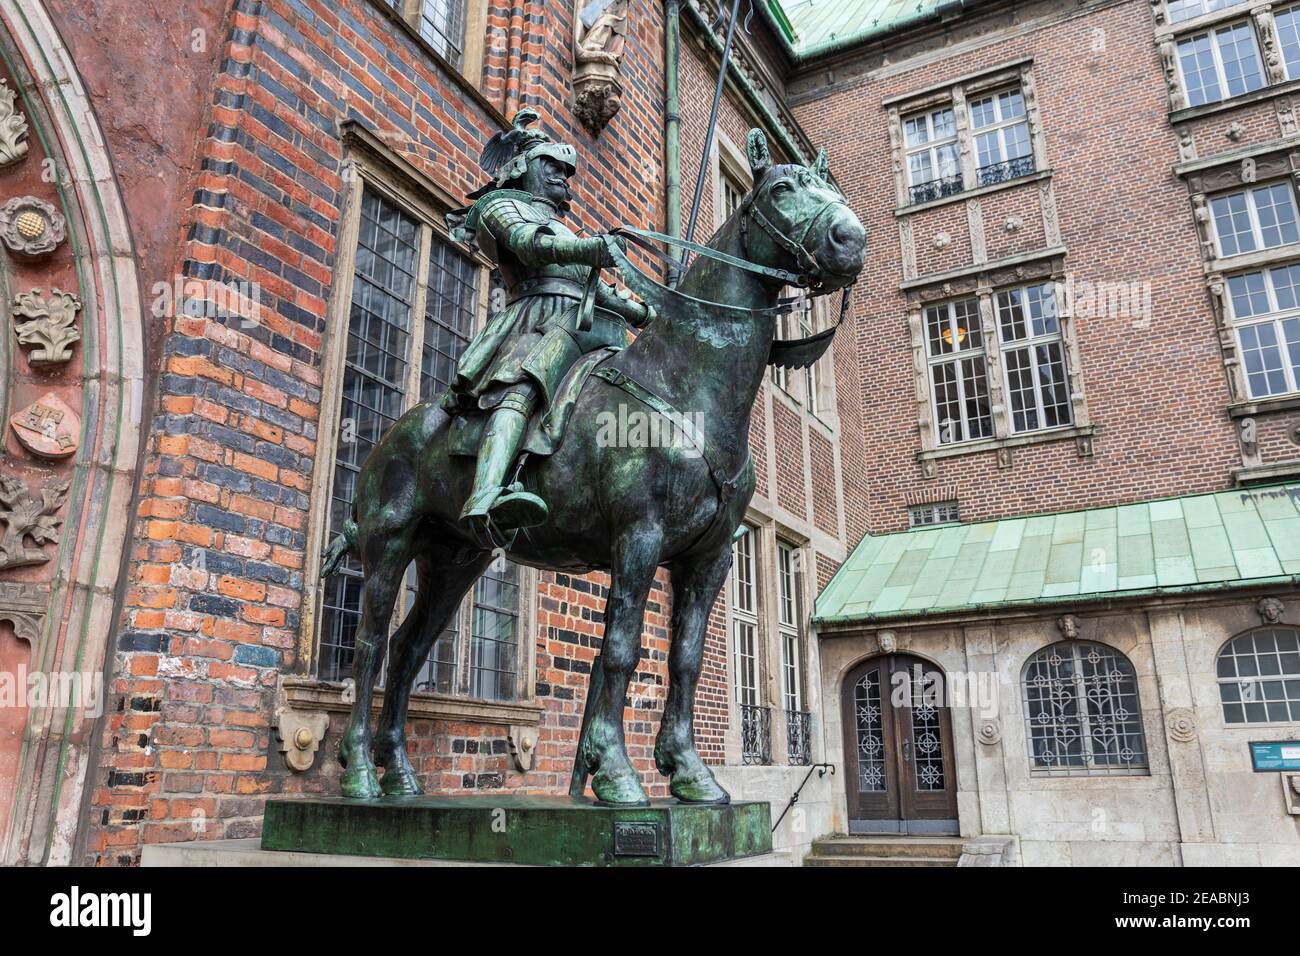 Old town hall, east portal, detail, one of the two armored knights on horseback, 'Herolde', by sculptor Rudolf Maison, Bremen, Stock Photo